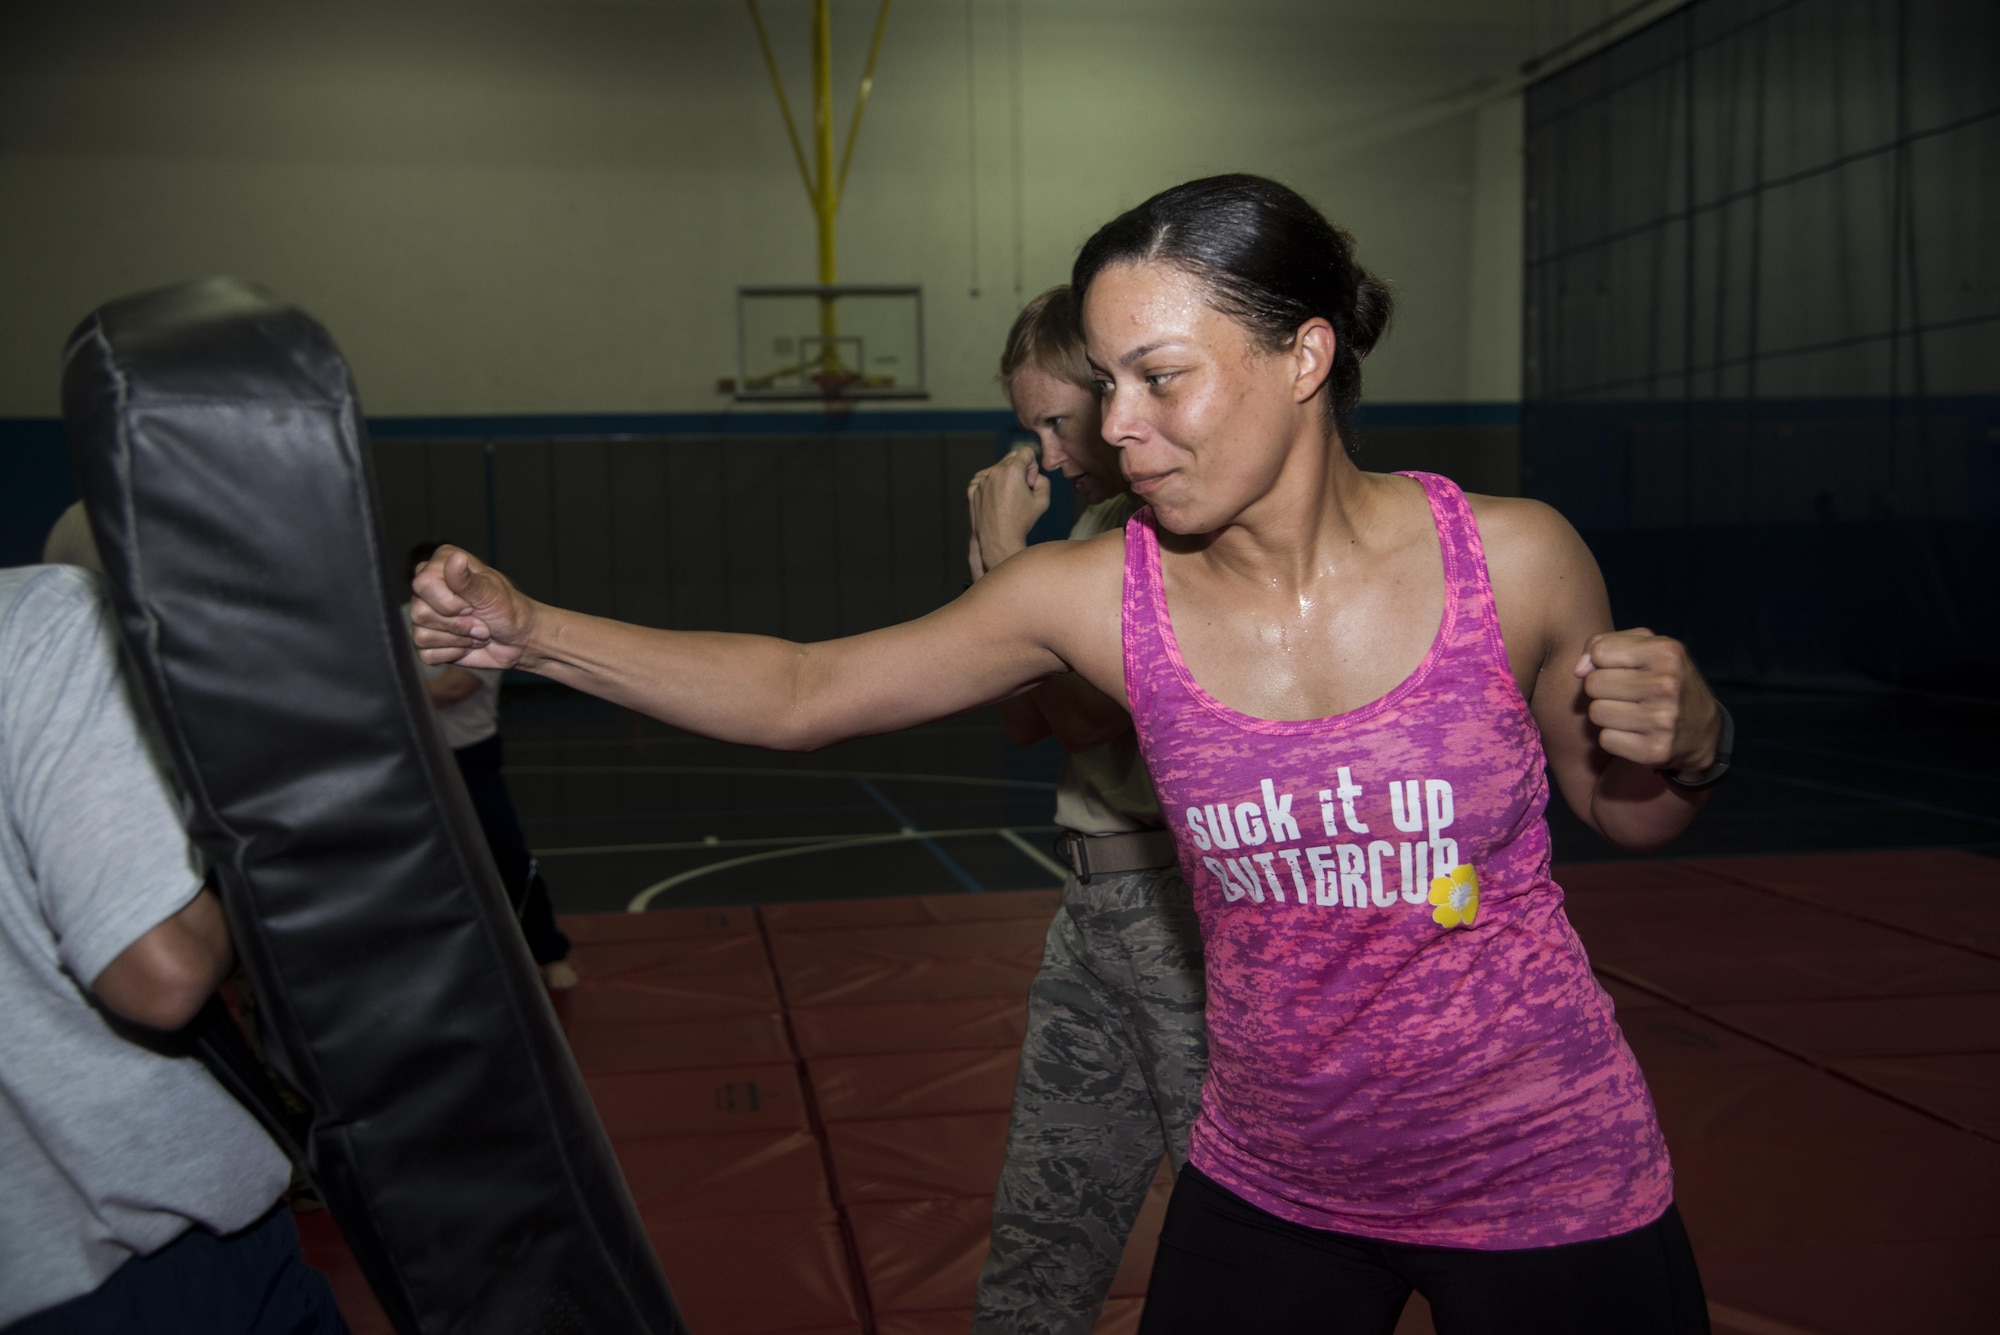 Tech. Sgt. Marquita Oliver, 379th Expeditionary Forces Support Squadron Blanchard-Preston Complex lodging operations non-commissioned officer in charge, positions herself to deliver a jab during a combatives class at the BPC gym May 29, 2015 at Al Udeid Air Base, Qatar. Bi-weekly, Airmen of the 379th Expeditionary Security Forces Squadron instruct members on non-lethal ways to defend themselves. (U.S. Air Force photo/Tech. Sgt. Rasheen Douglas)